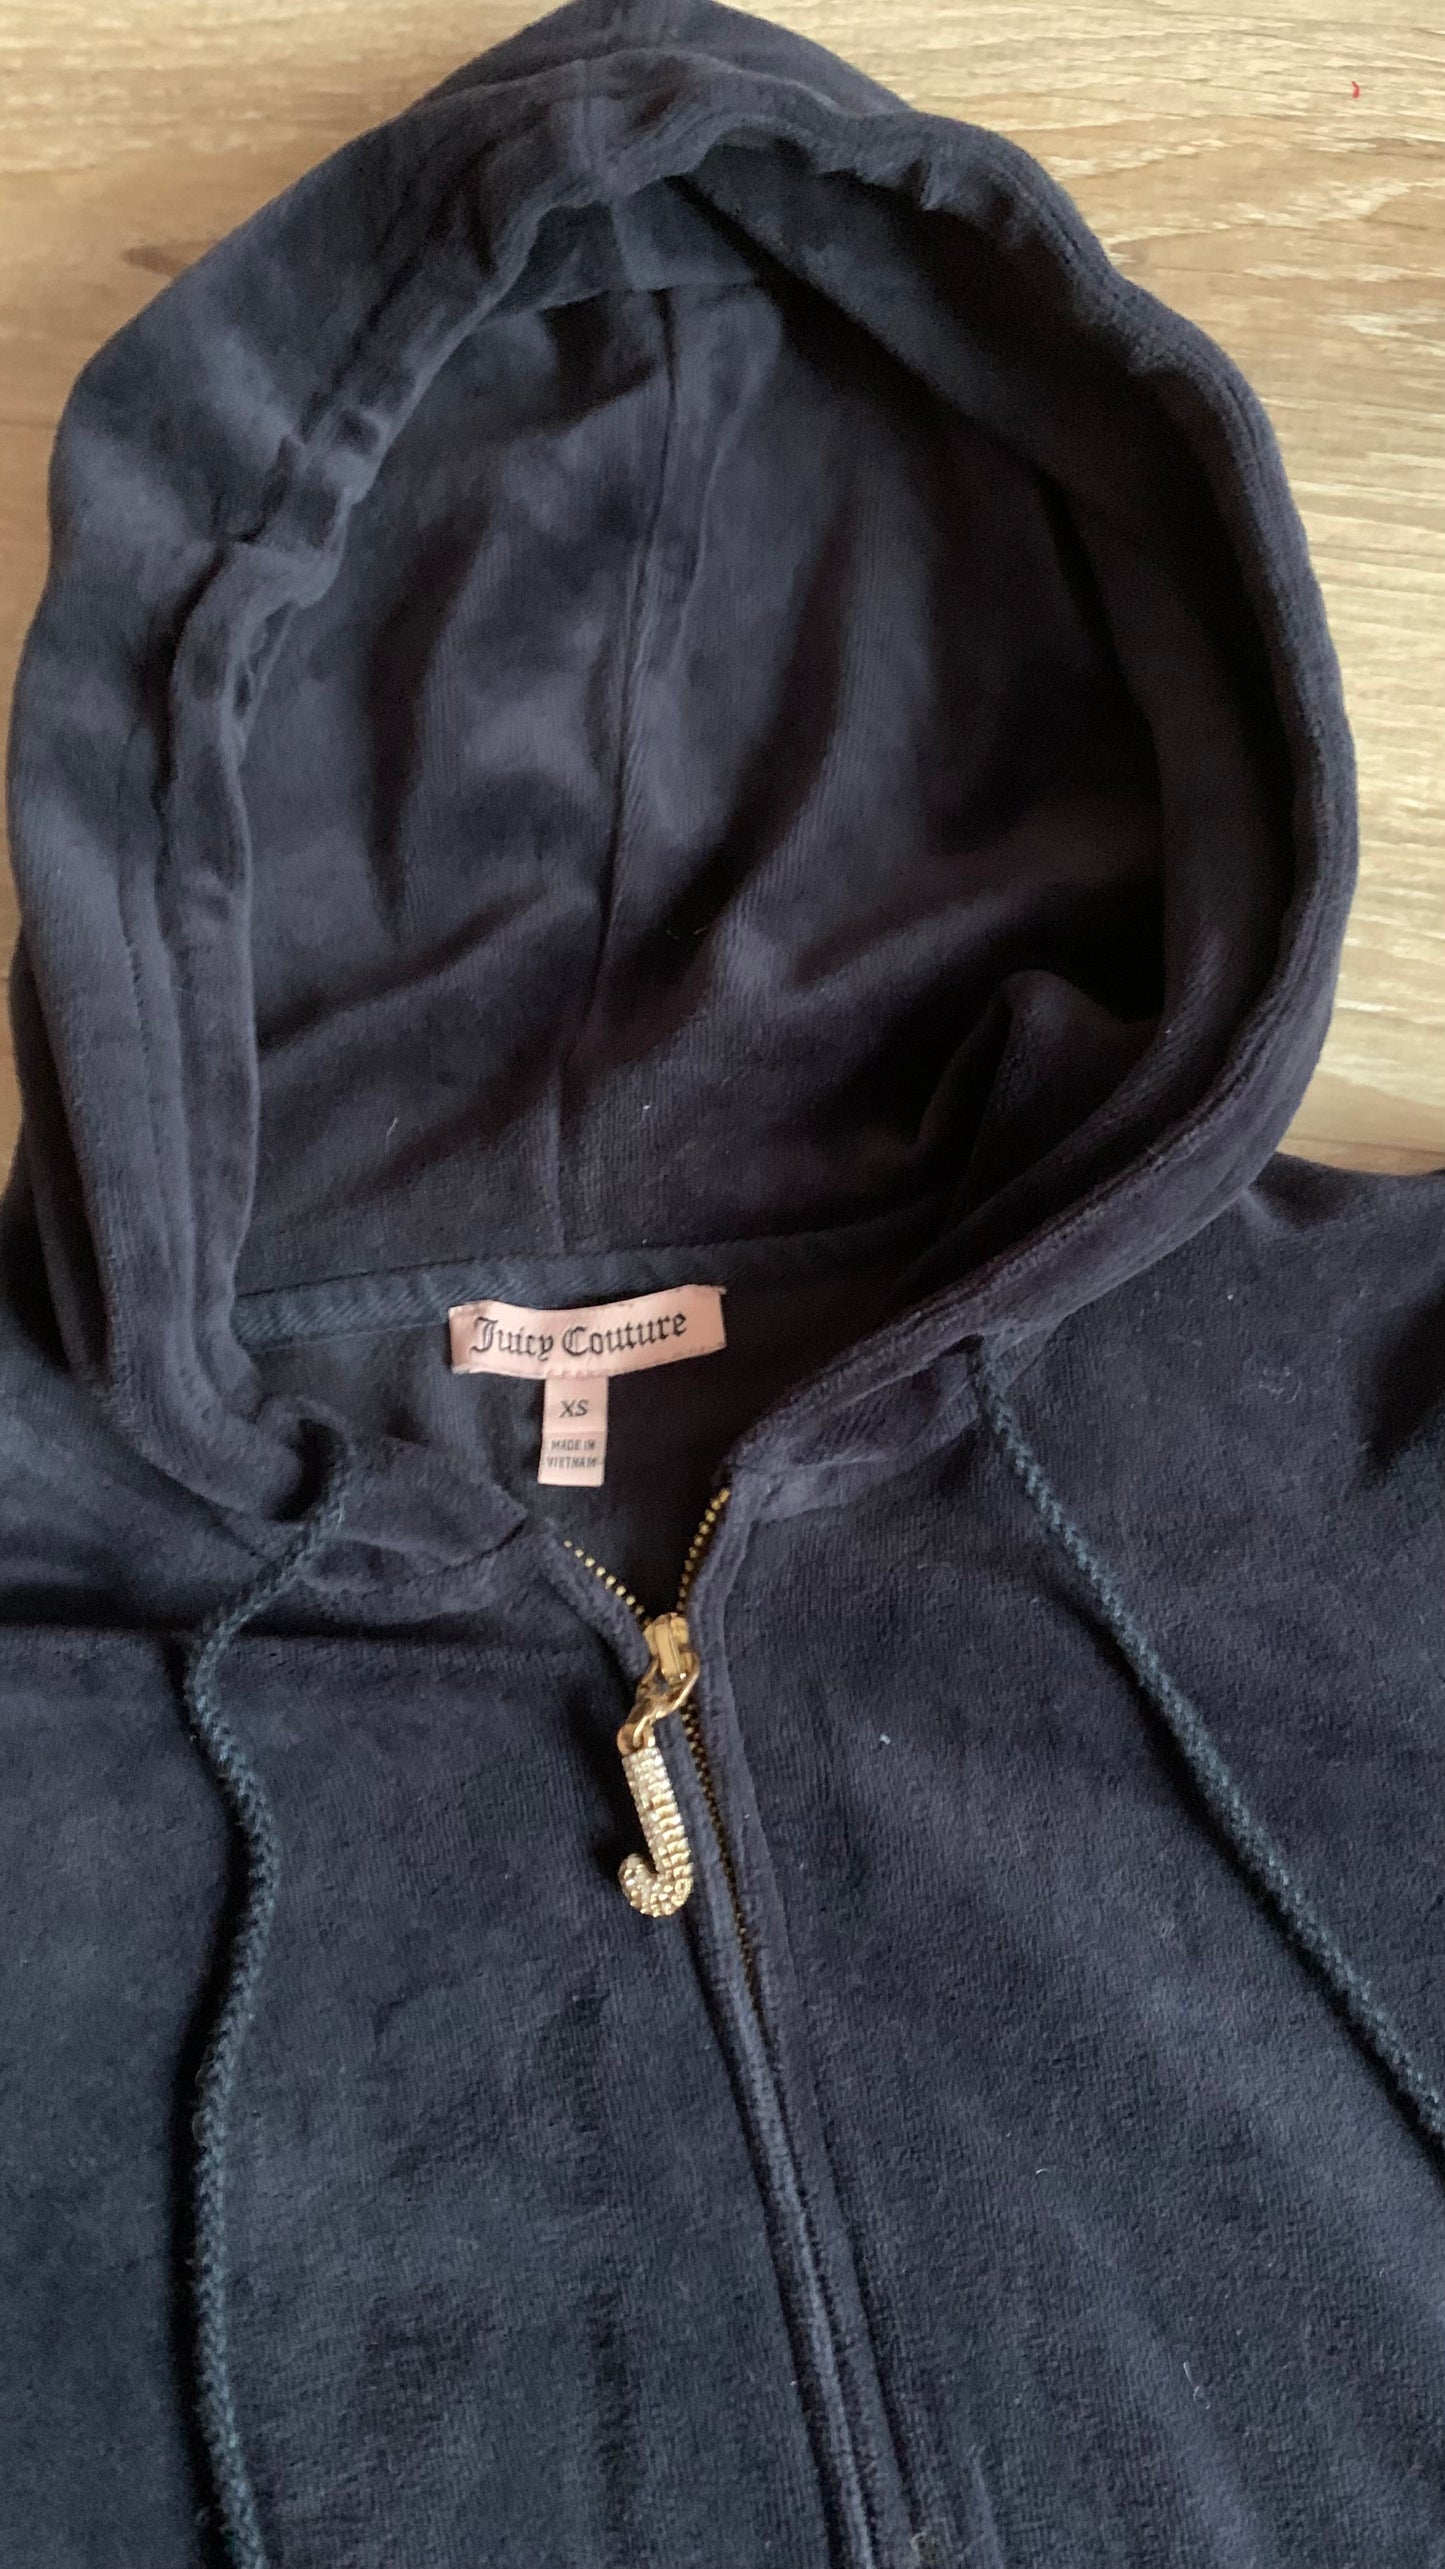 Navy Blue Juicy Couture Track Jacket With Bling Zipper